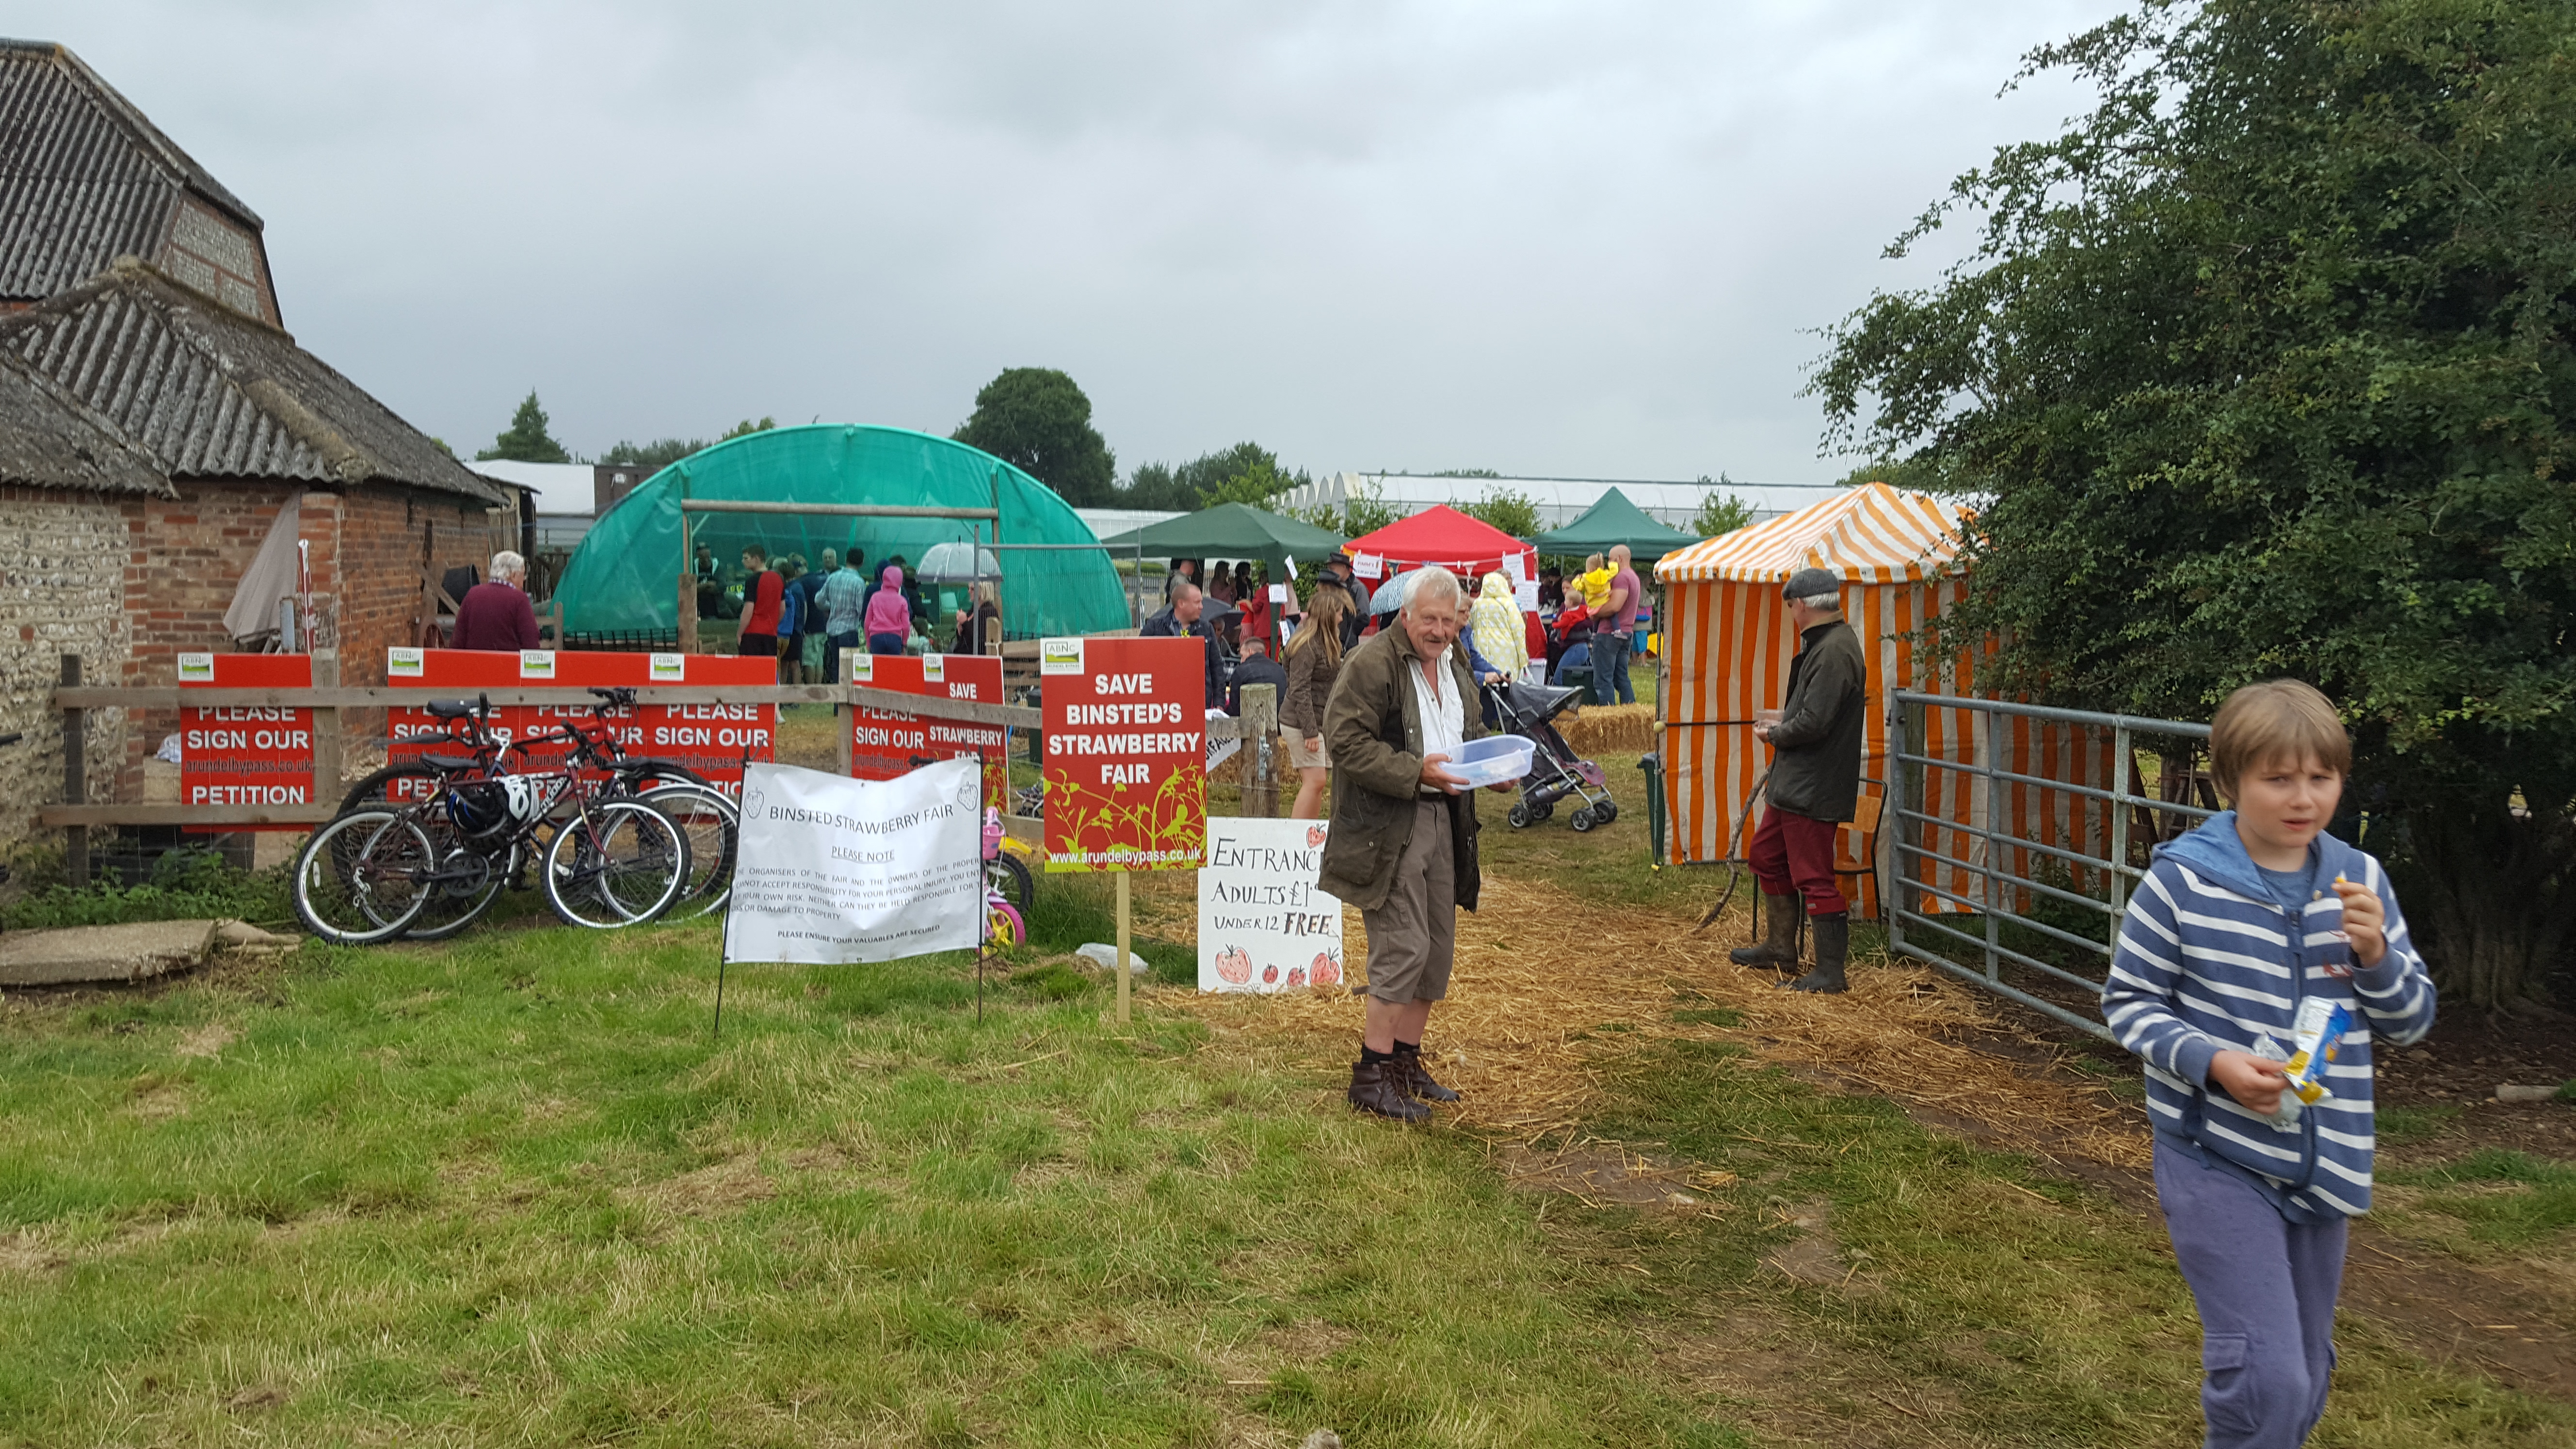 Crowds at Binsted strawberry fair